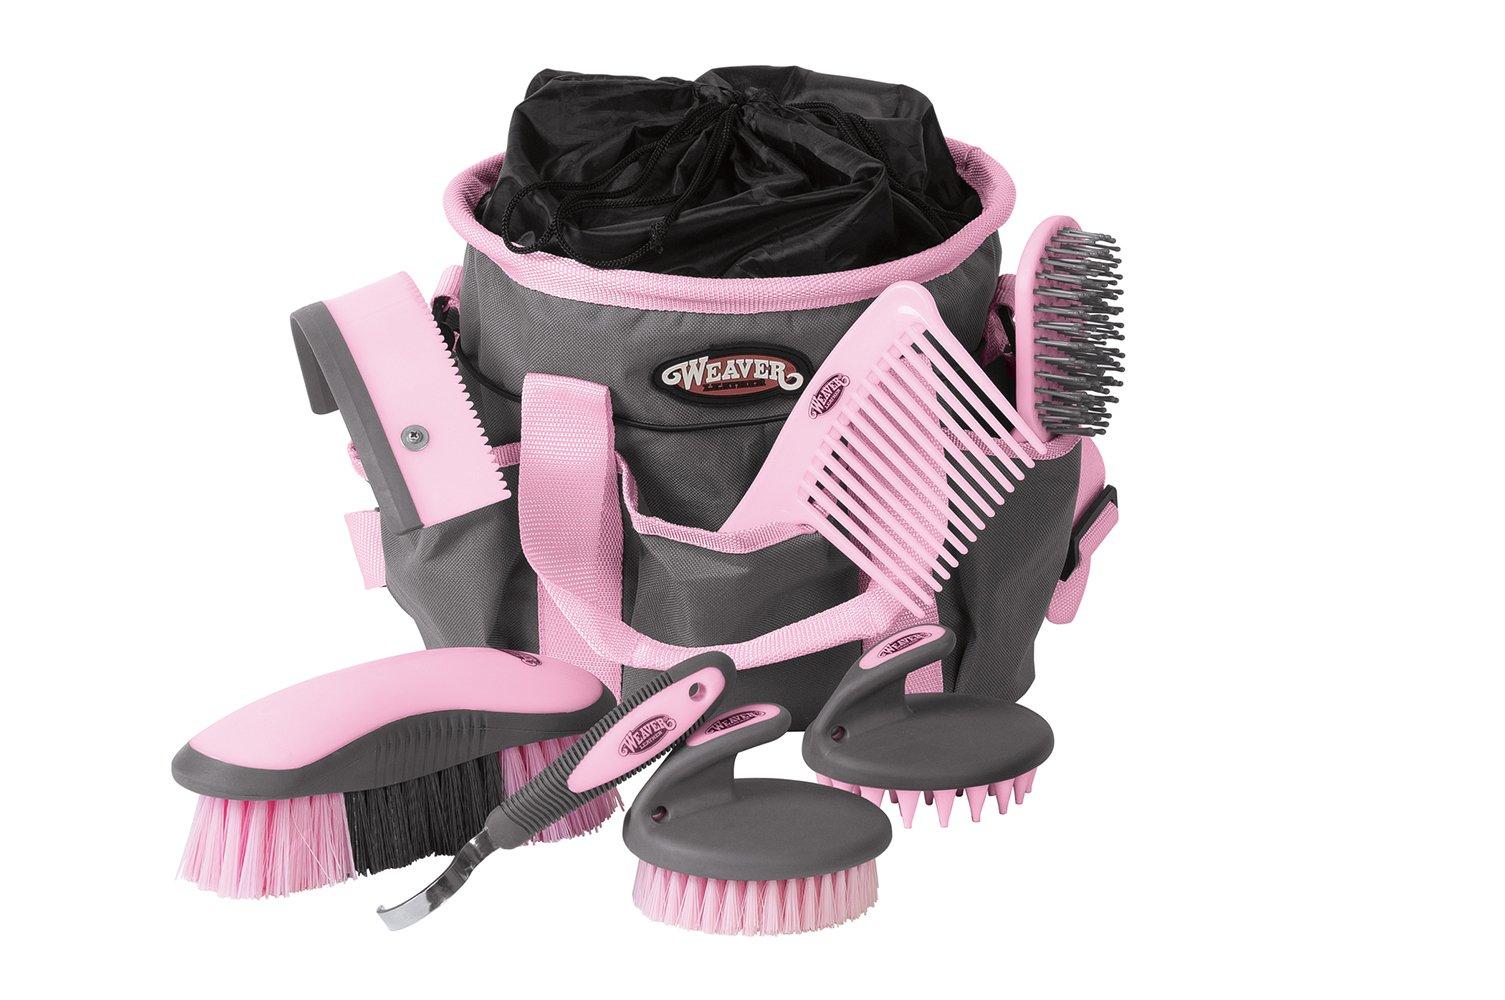 Weaver Leather Grooming Kit, Gray/Pink